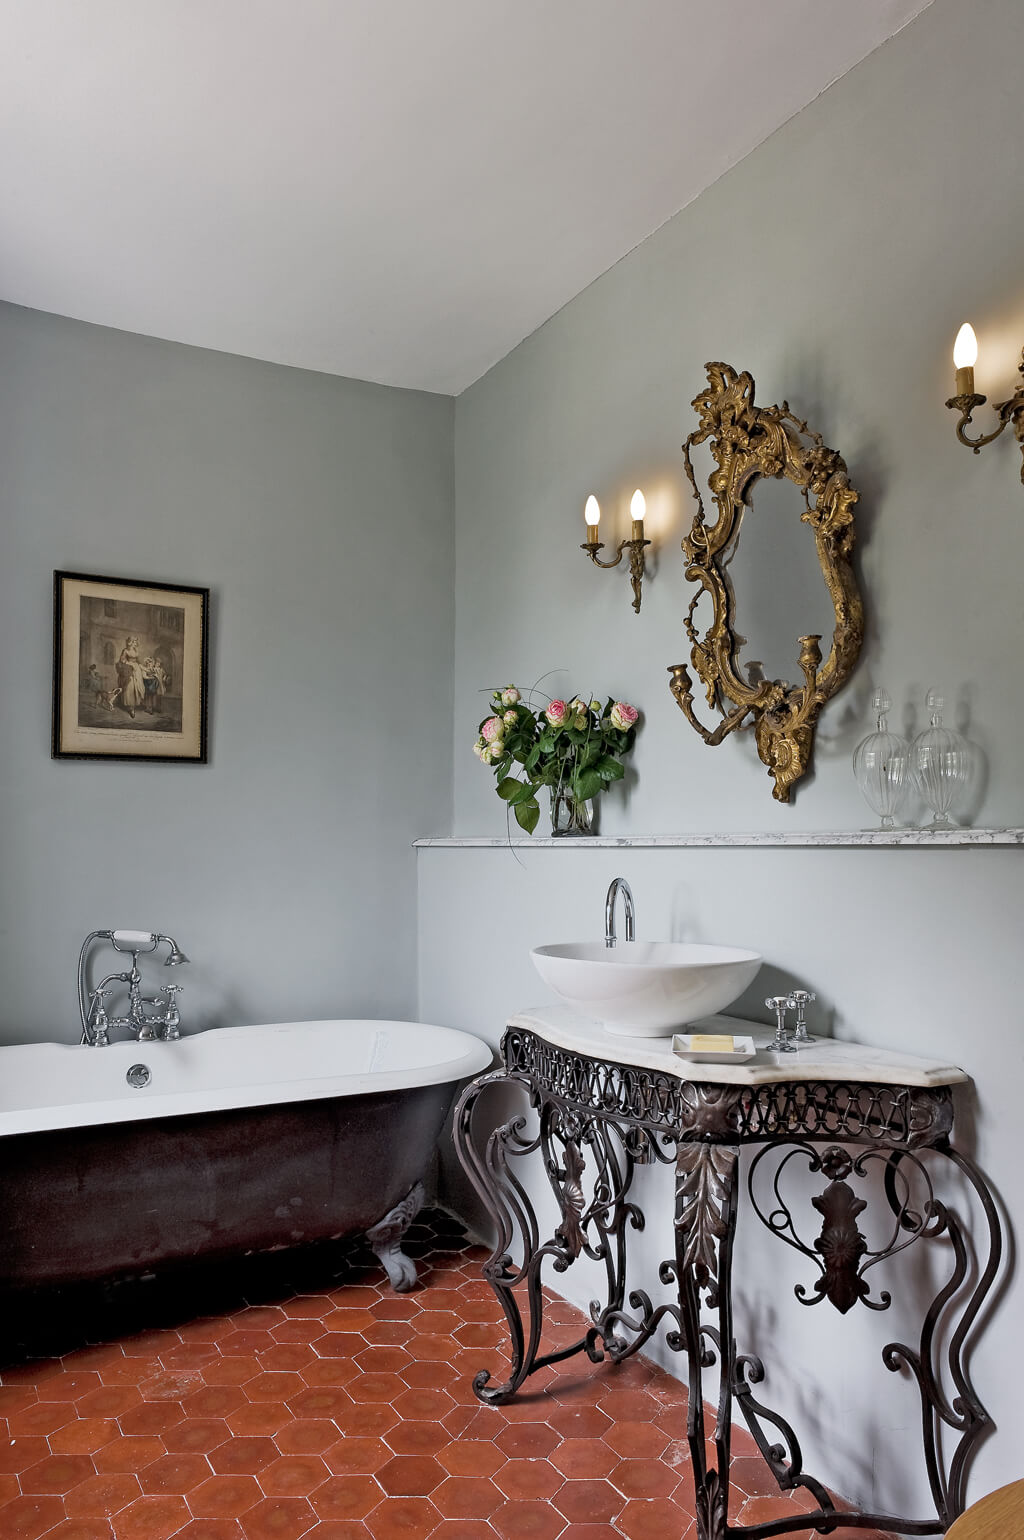 Elegant Old World French bath in Provence chateau with clawfoot tub, hex terracotta tiles, and ornate demilune table - Haven In.